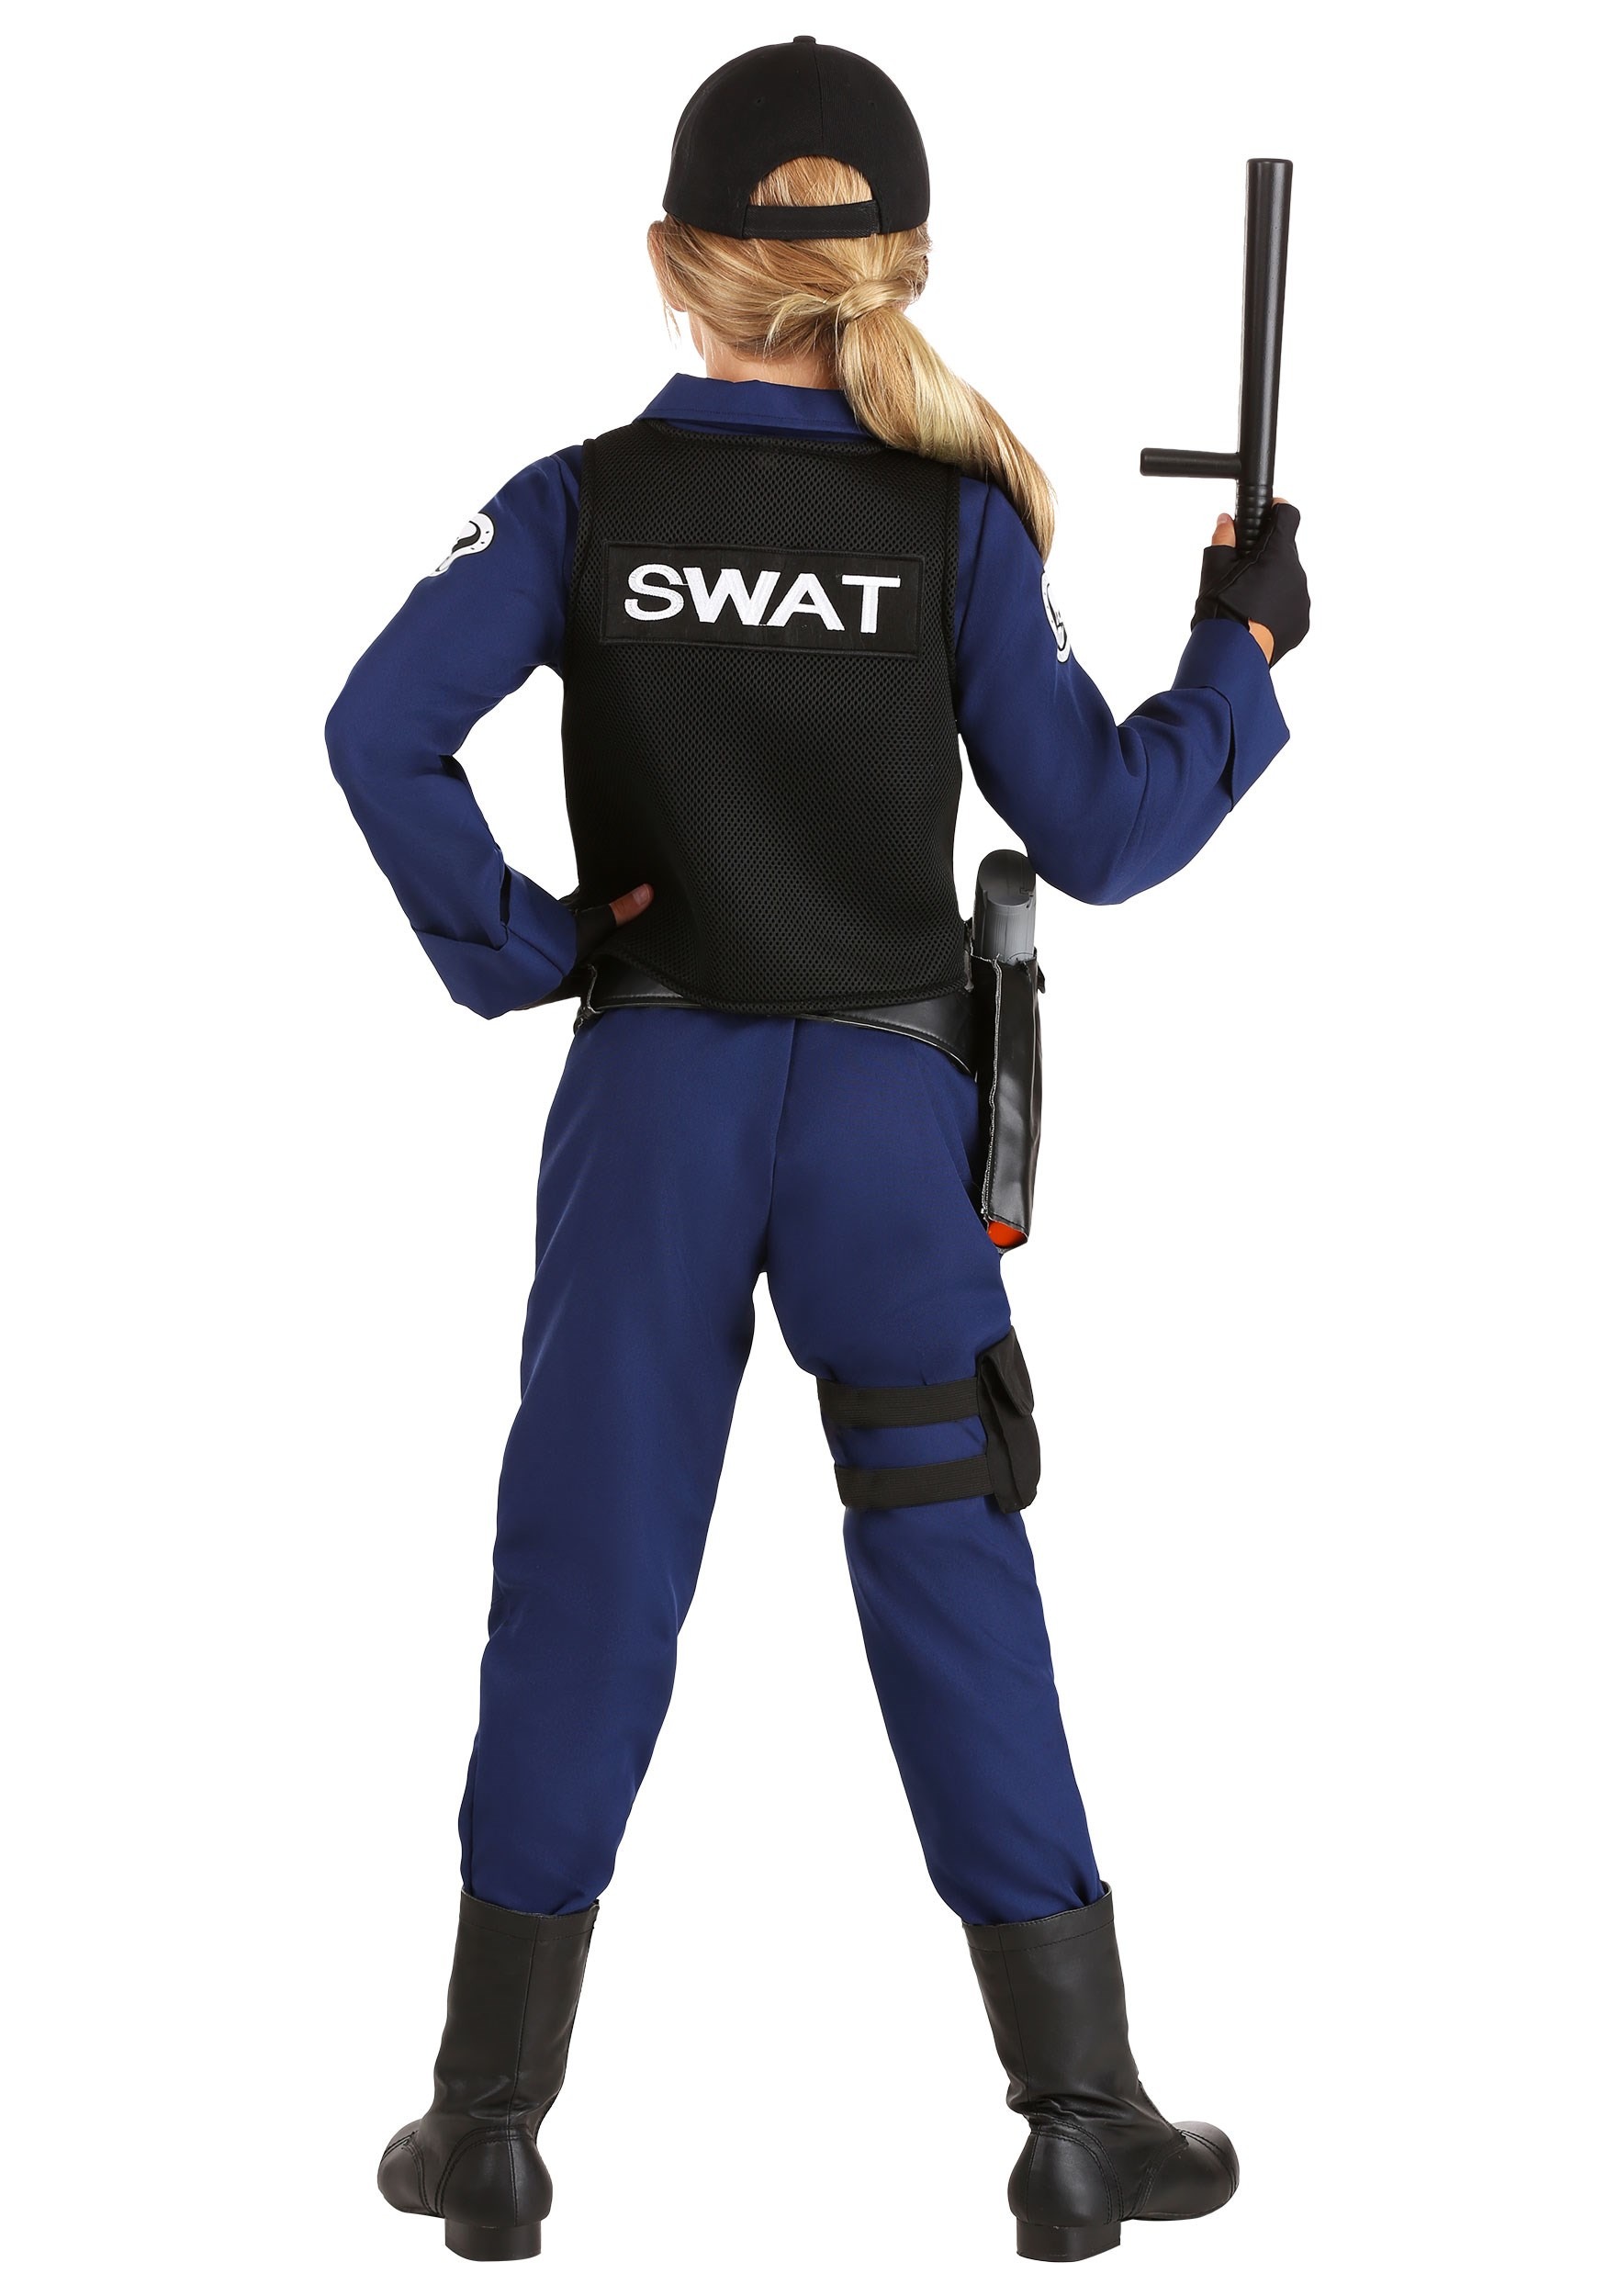 Police SWAT Costume For Girl's